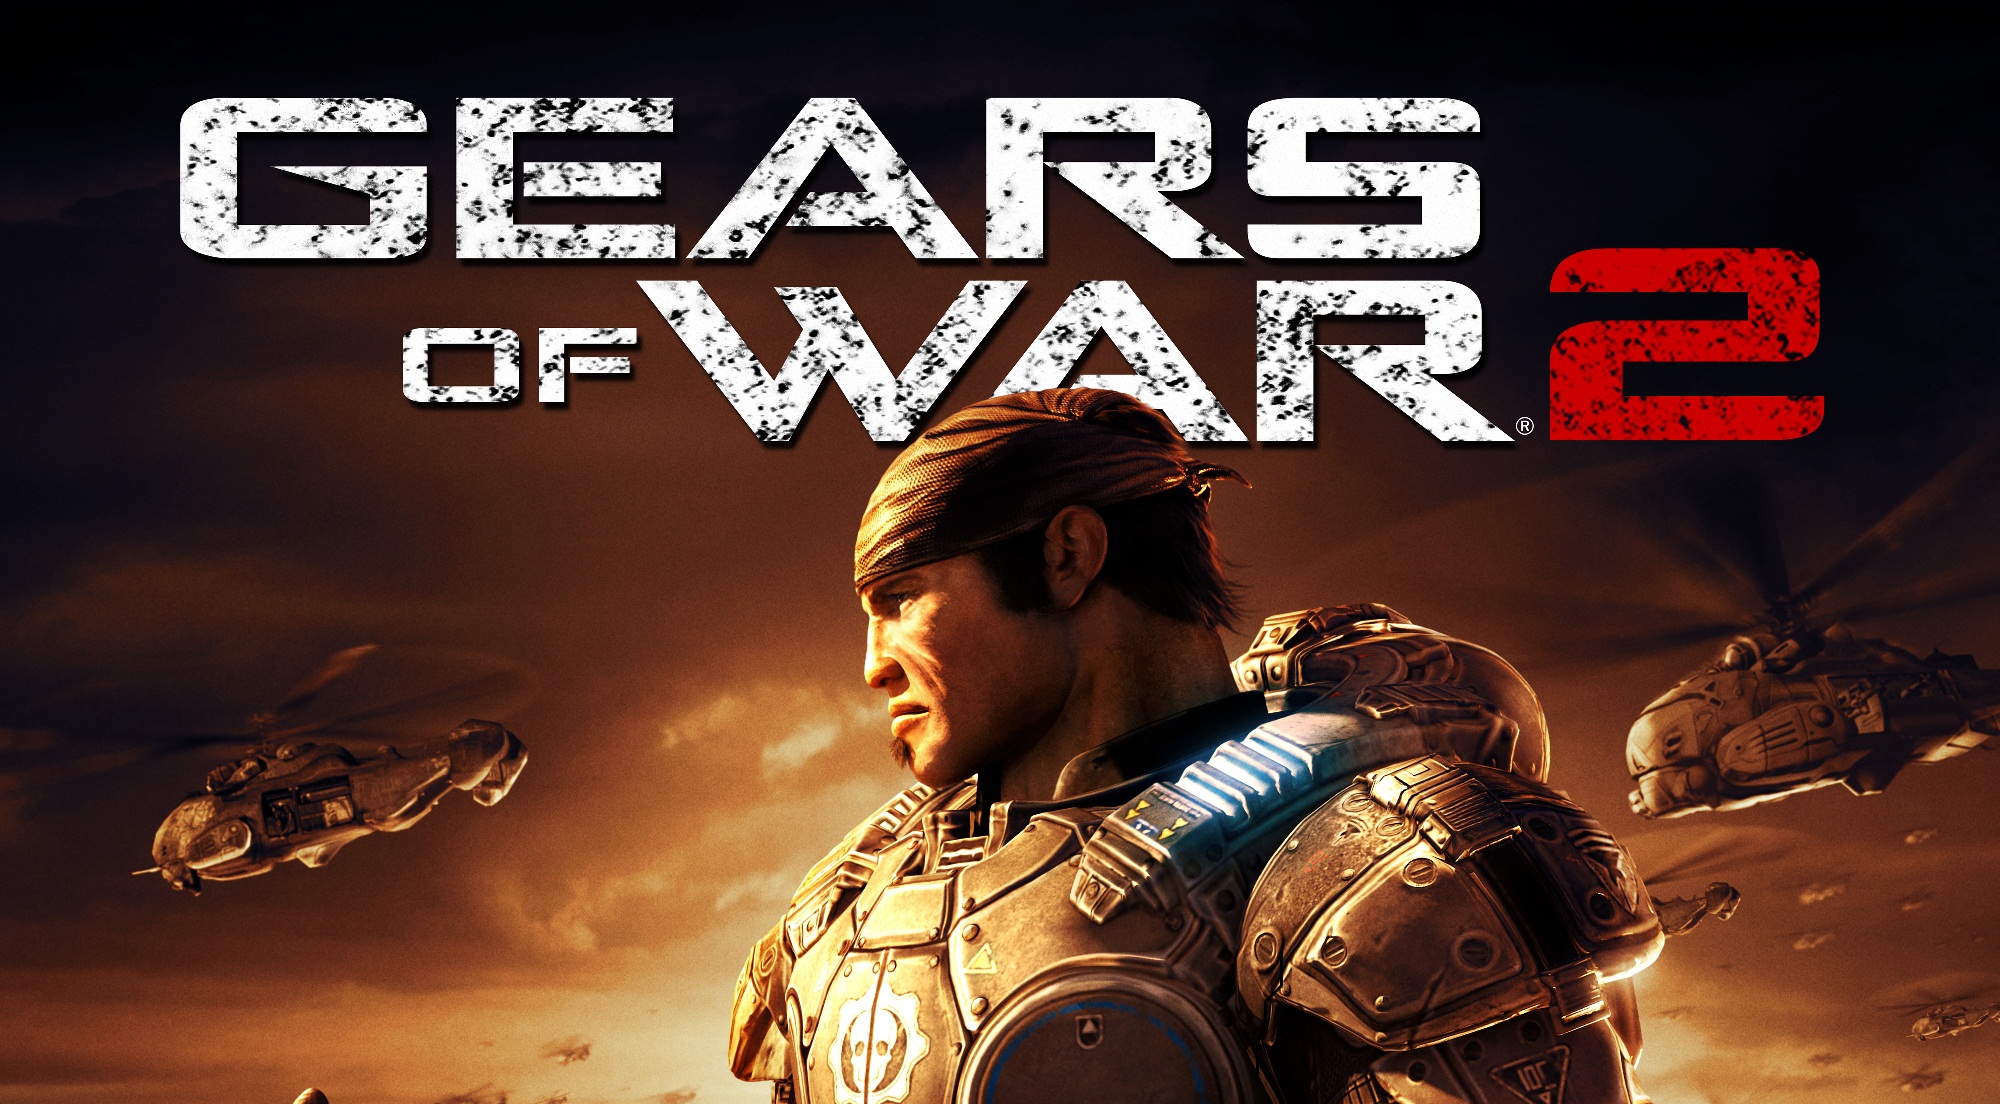 download gears of war ps4 for free